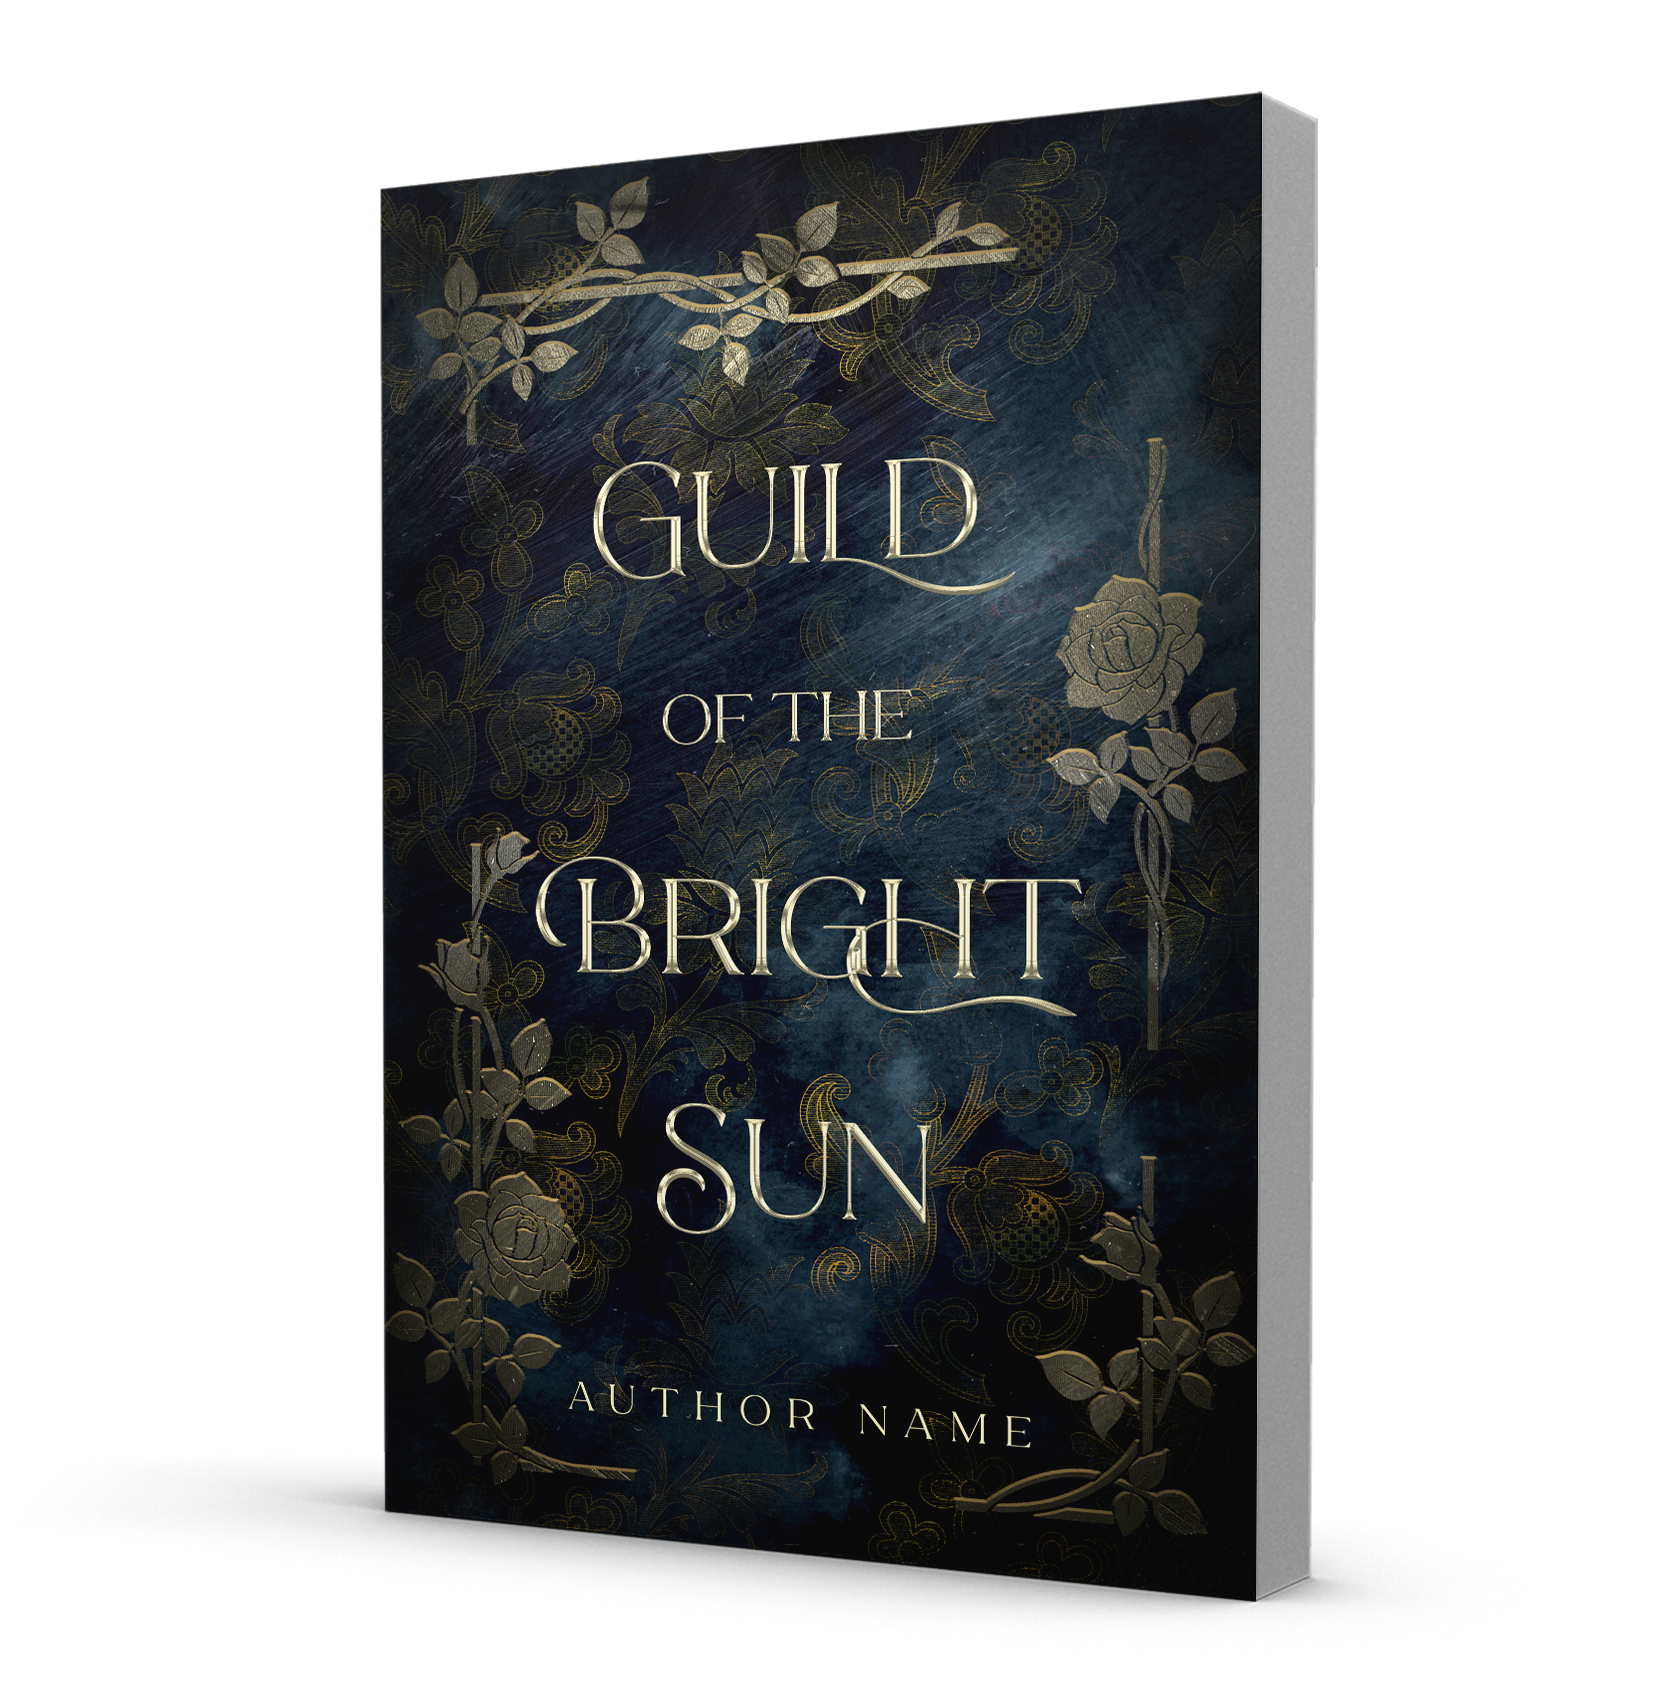 A dark fantasy book cover design with golden climbing roses on a blue damask background.